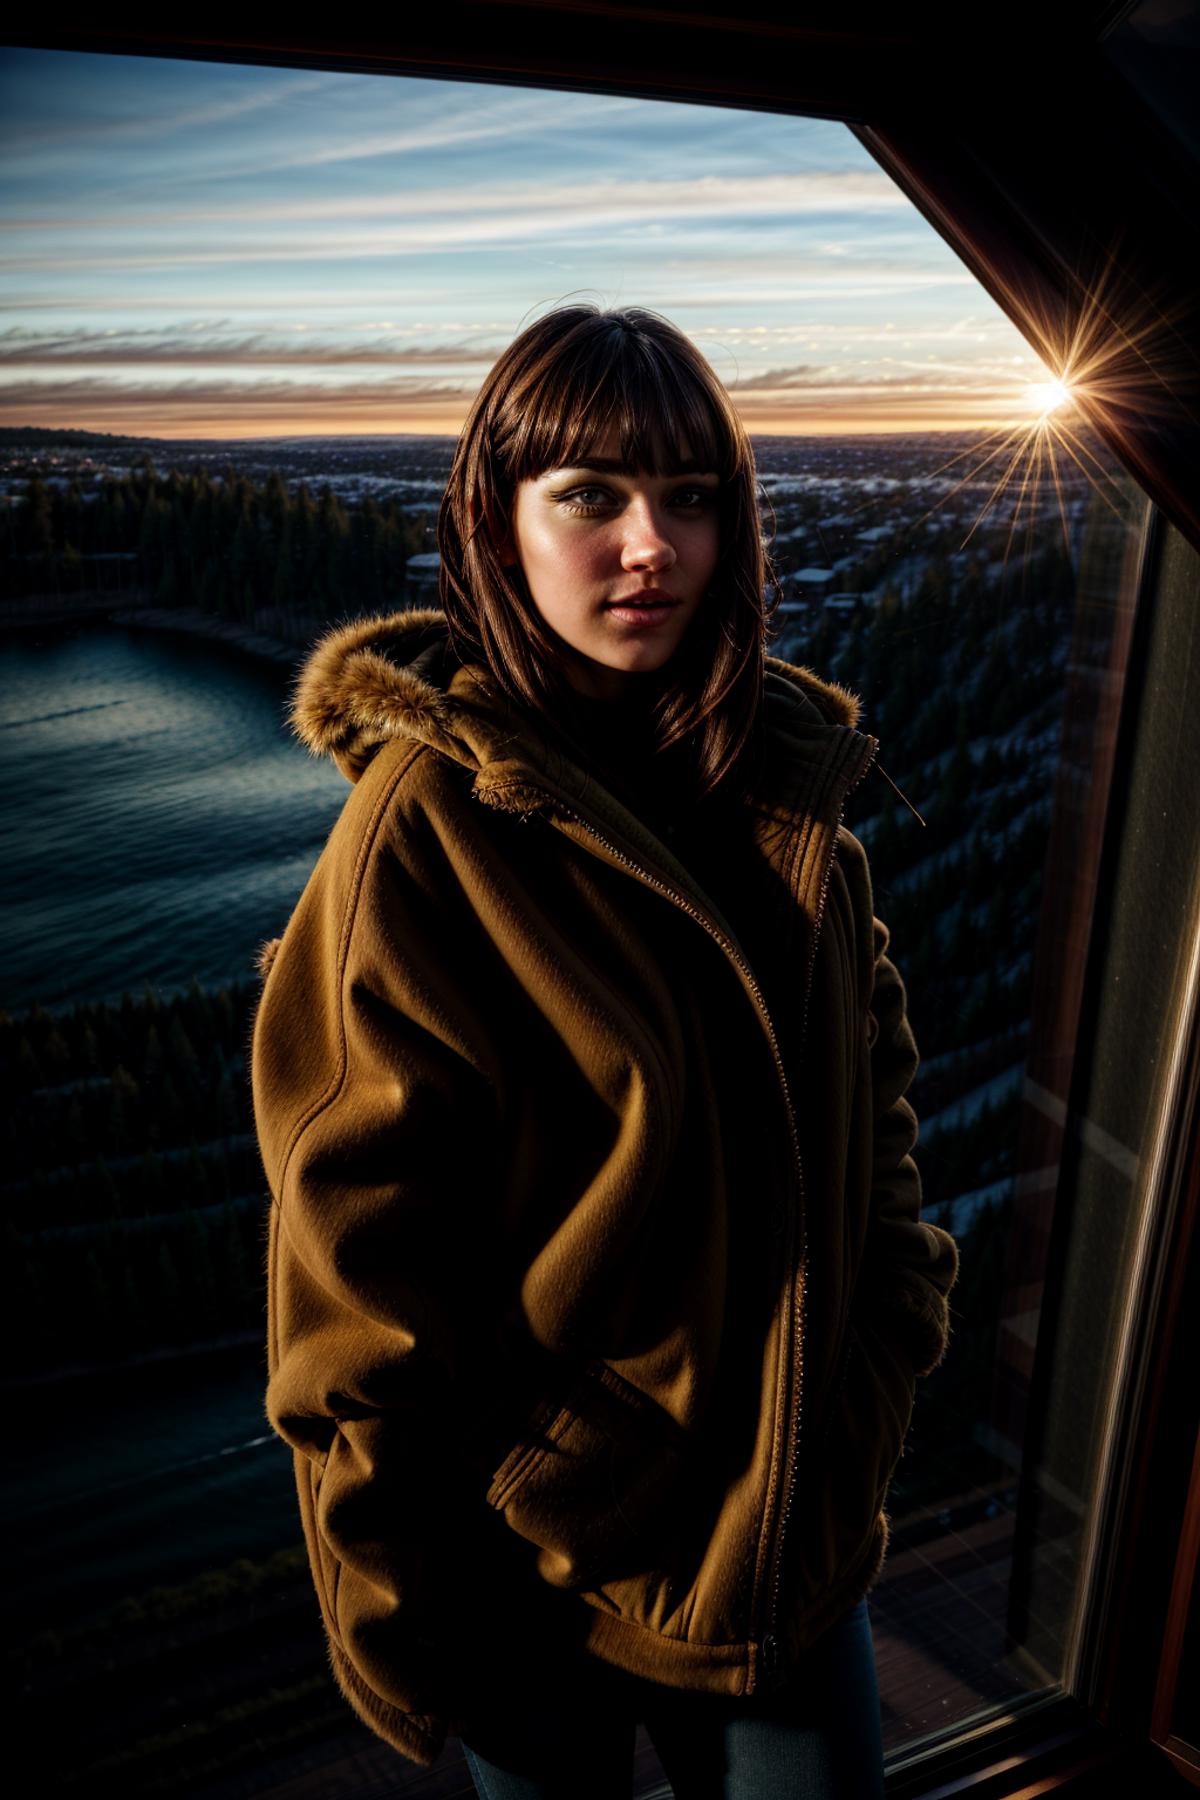 A Woman Wearing a Beige Jacket and Staring at the Sunset.